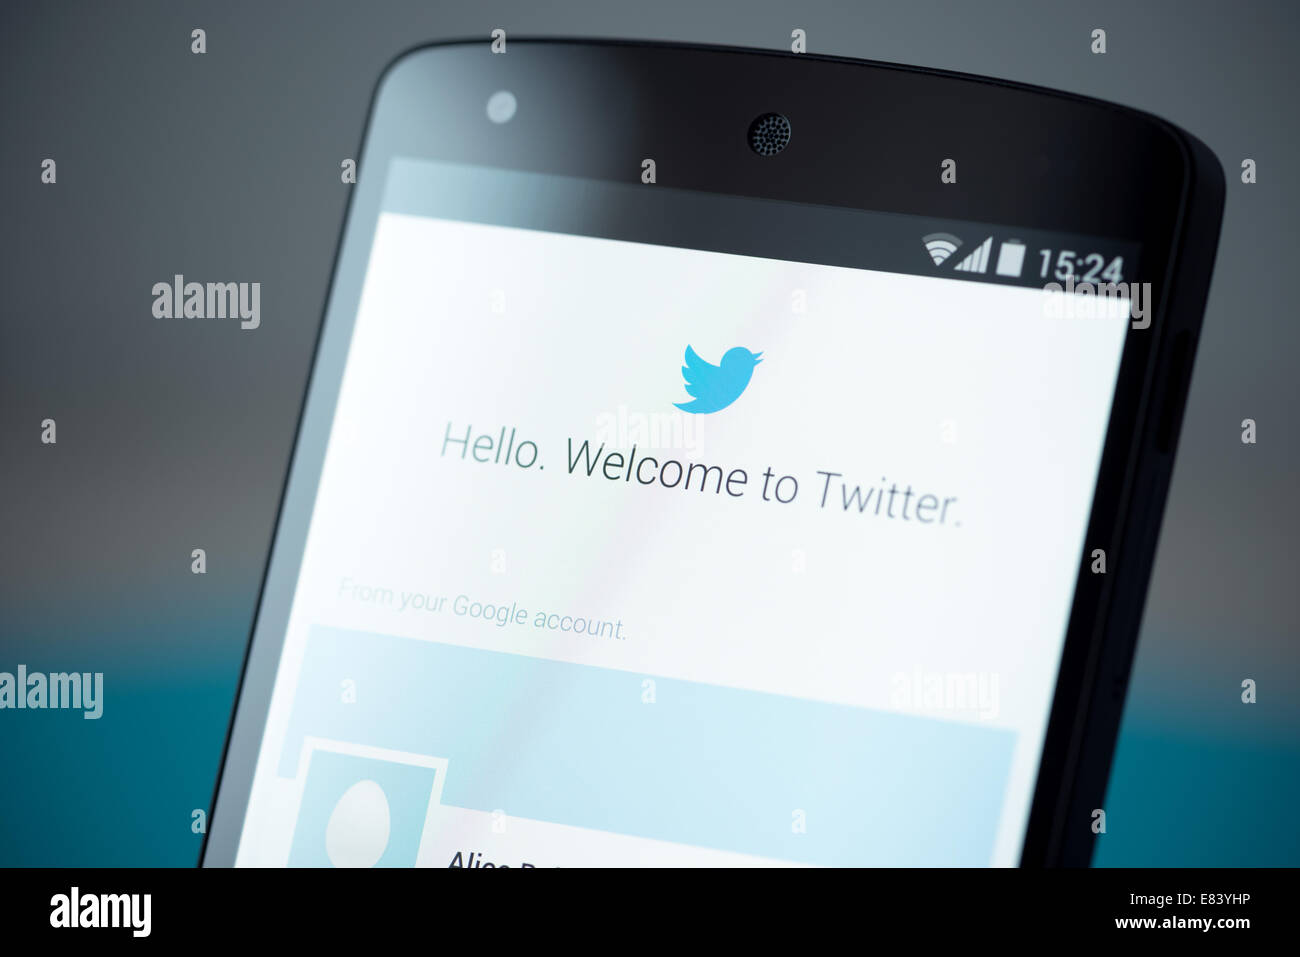 Close-up photo of brand new Google Nexus 5, powered by Android 4.4 version, with Twitter login account page on a screen. Stock Photo